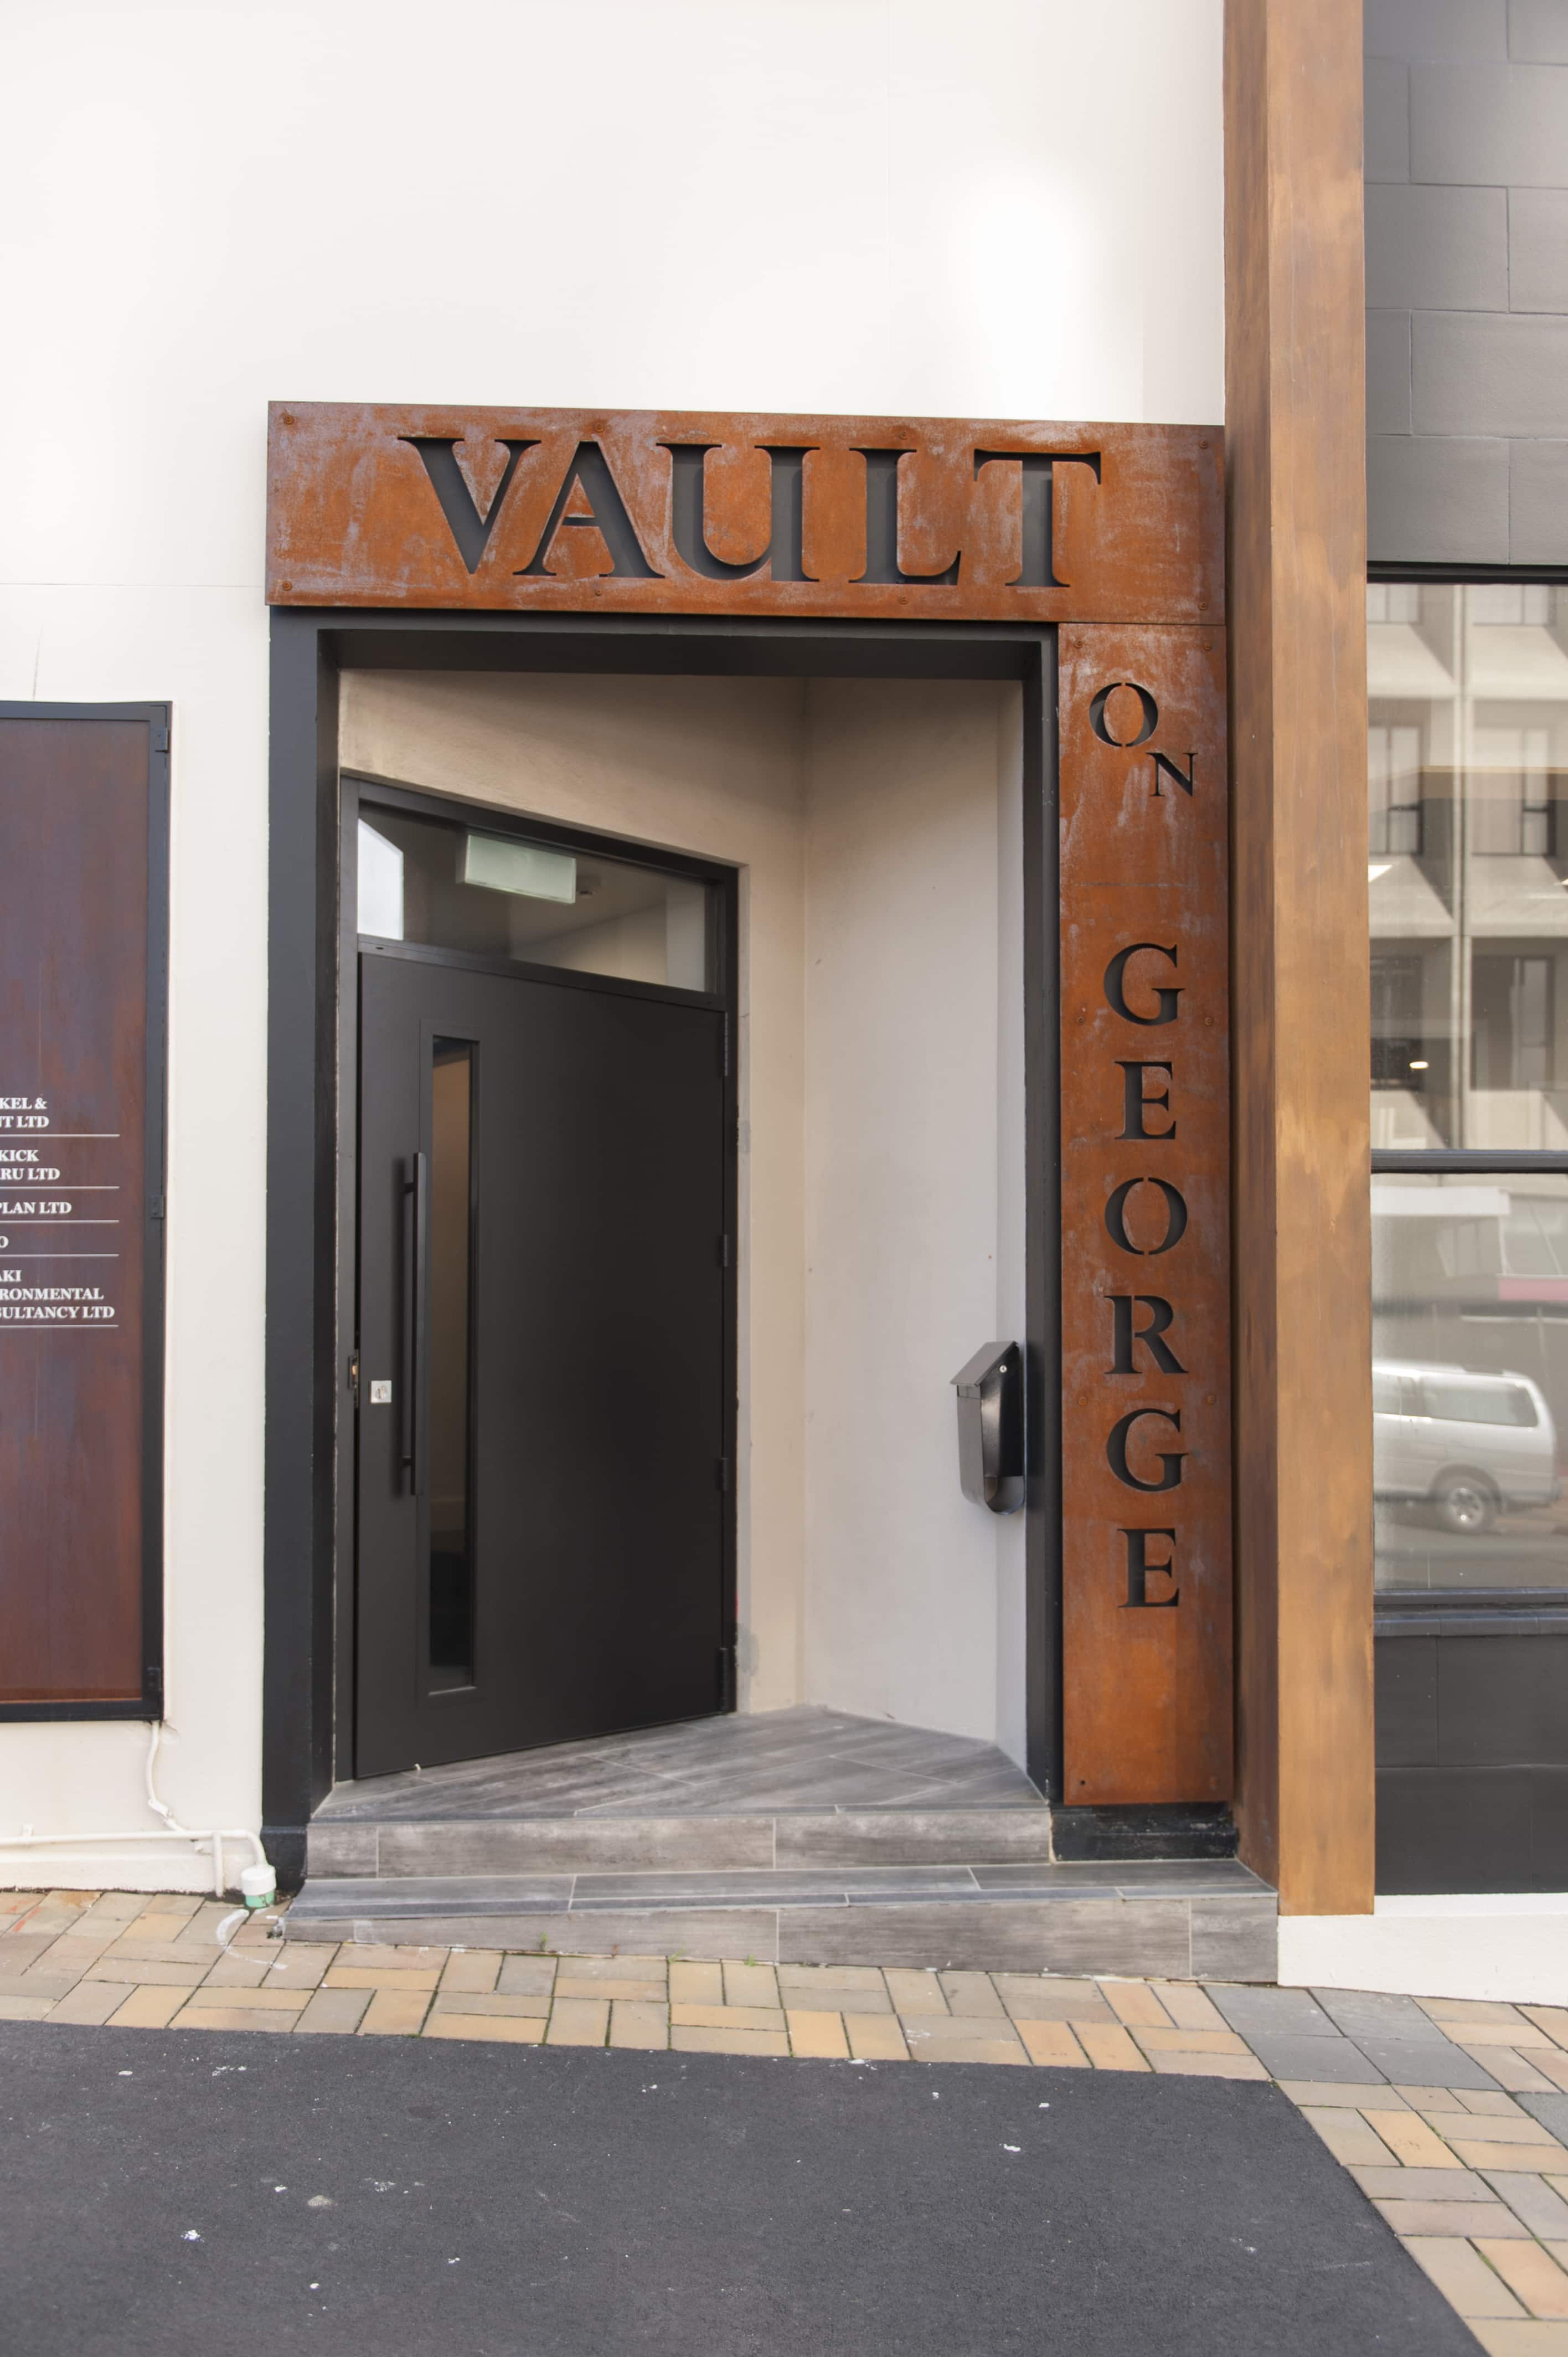 Entrance to the Vault on George